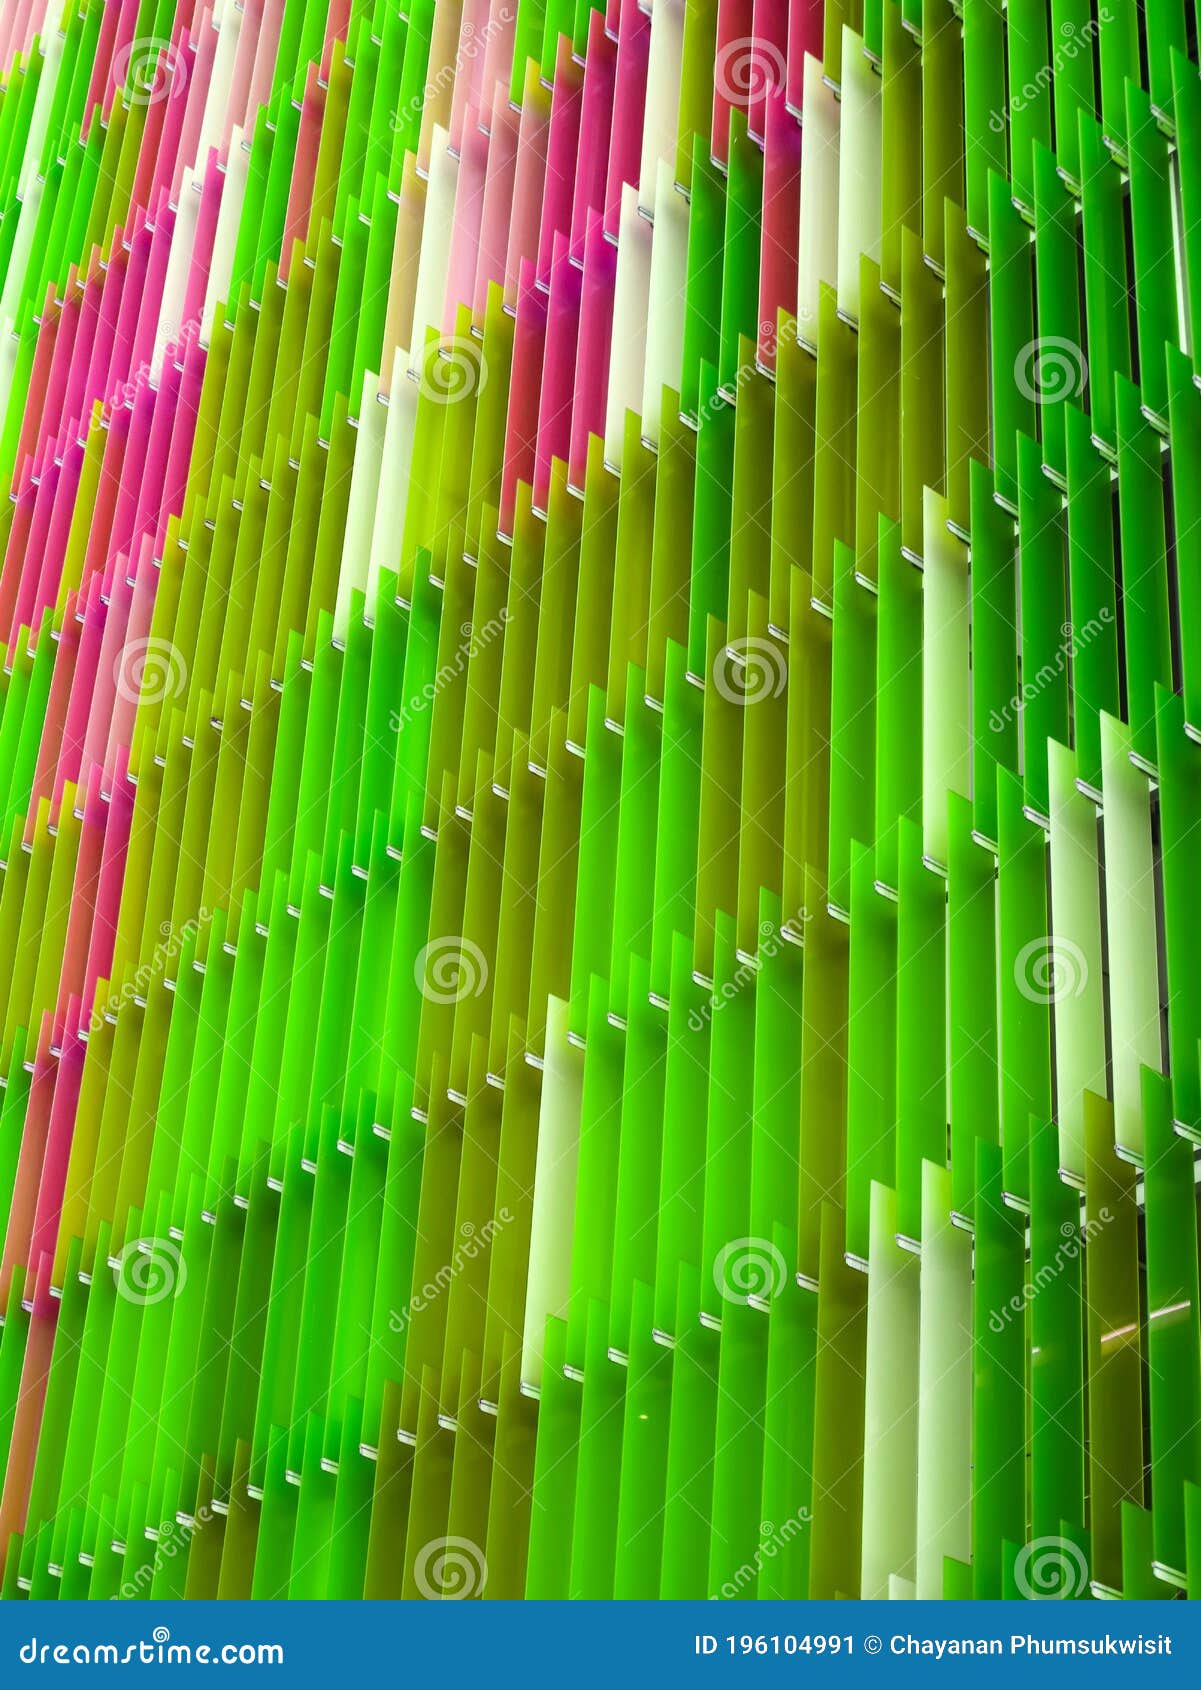 Acrylic Plastic Sheet Interior Vertical, Color Moss Green Apple Stock Image  - Image of acrylic, equipment: 196104991